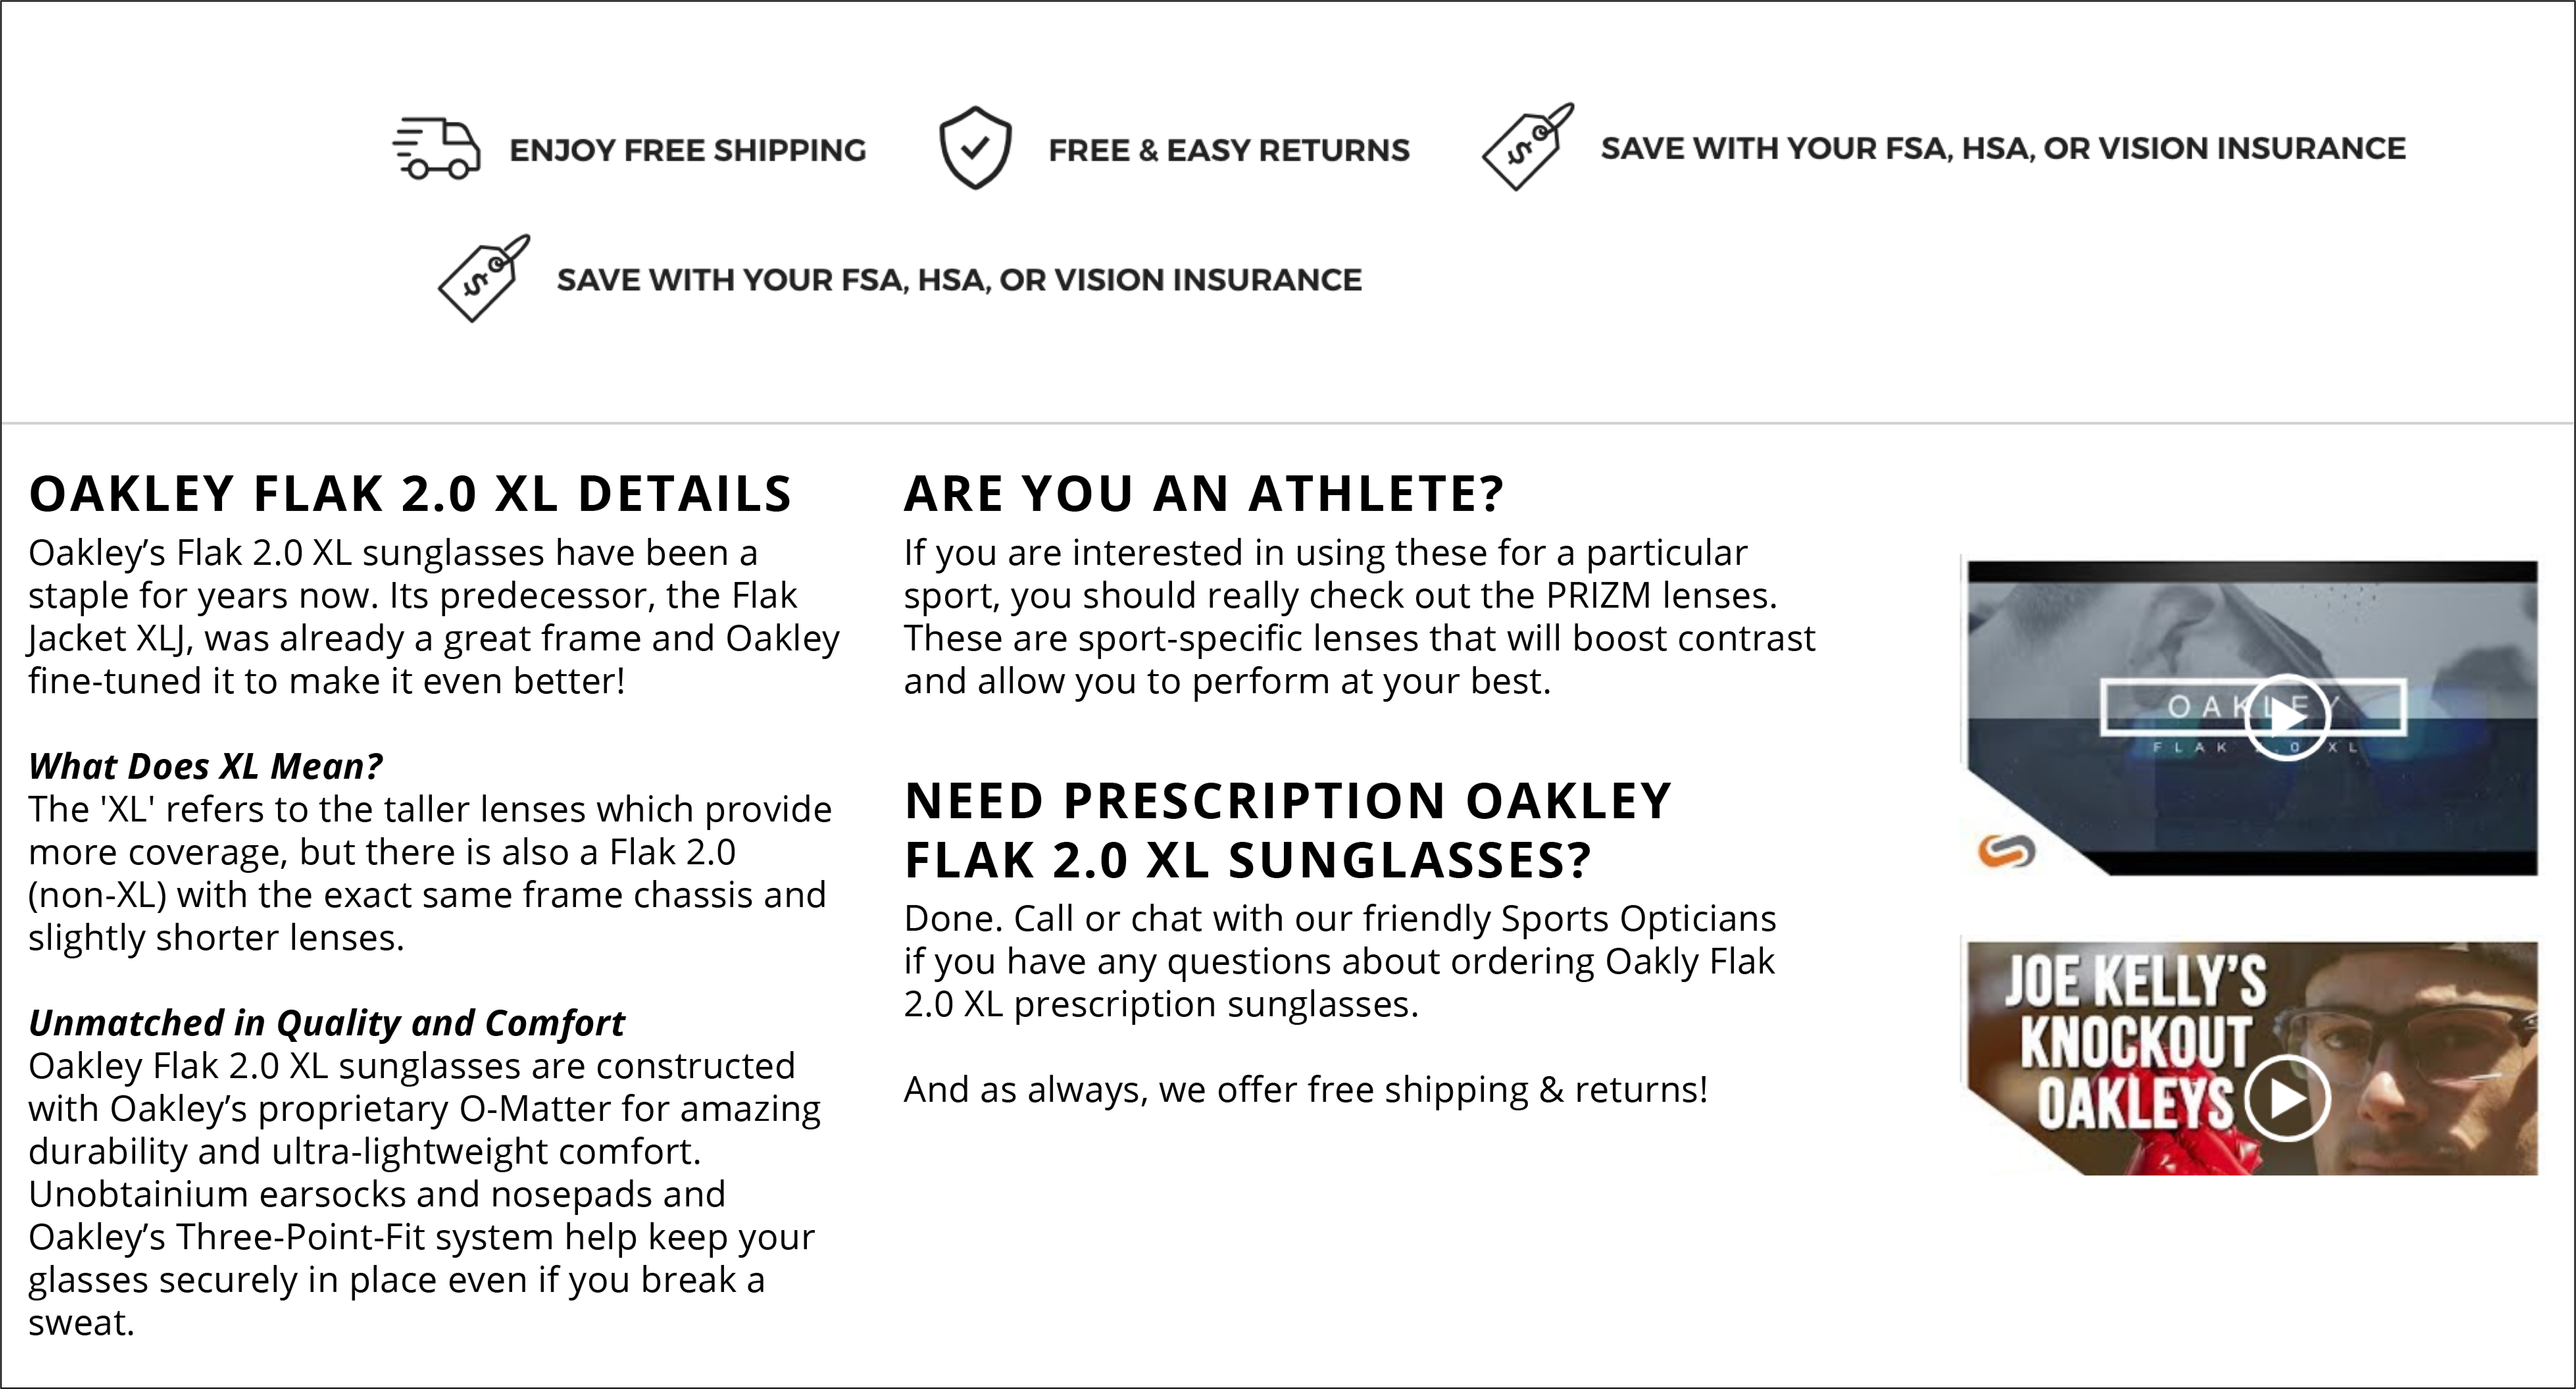 My version of the same Oakley product description.